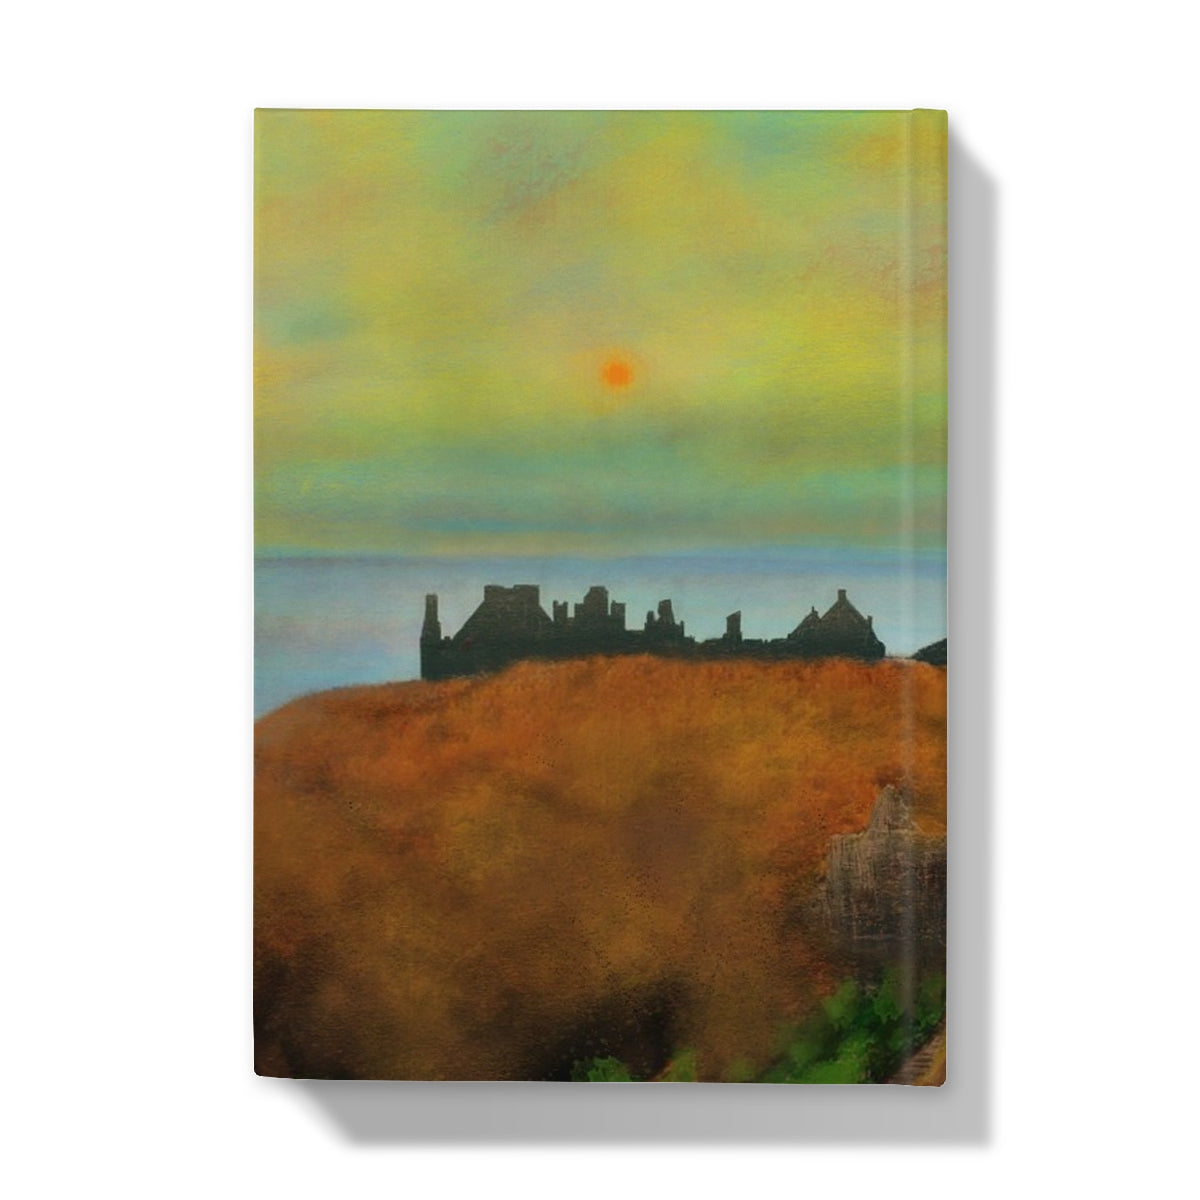 Dunnottar Castle Art Gifts Hardback Journal-Journals & Notebooks-Historic & Iconic Scotland Art Gallery-Paintings, Prints, Homeware, Art Gifts From Scotland By Scottish Artist Kevin Hunter